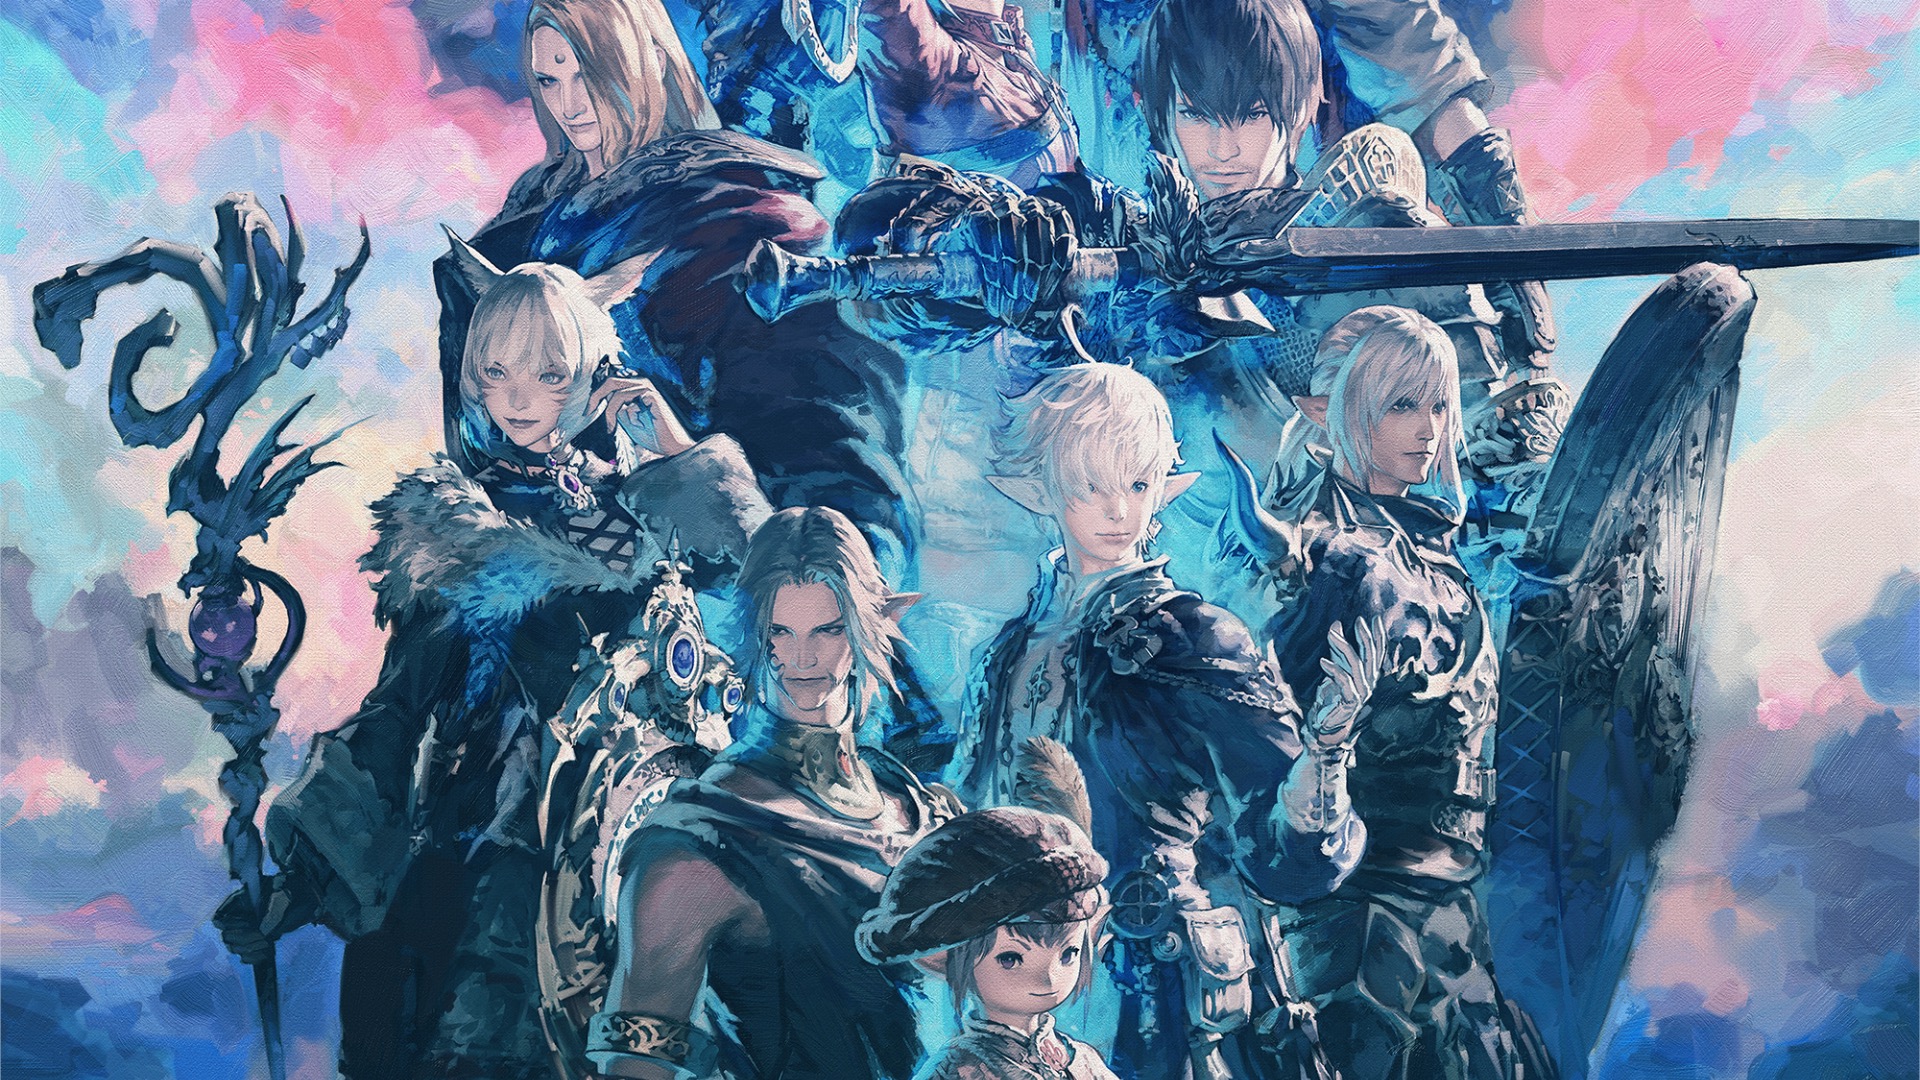 Final Fantasy XIV Endwalker Release Date Announced, Collector's Edition Revealed • The Mako Reactor